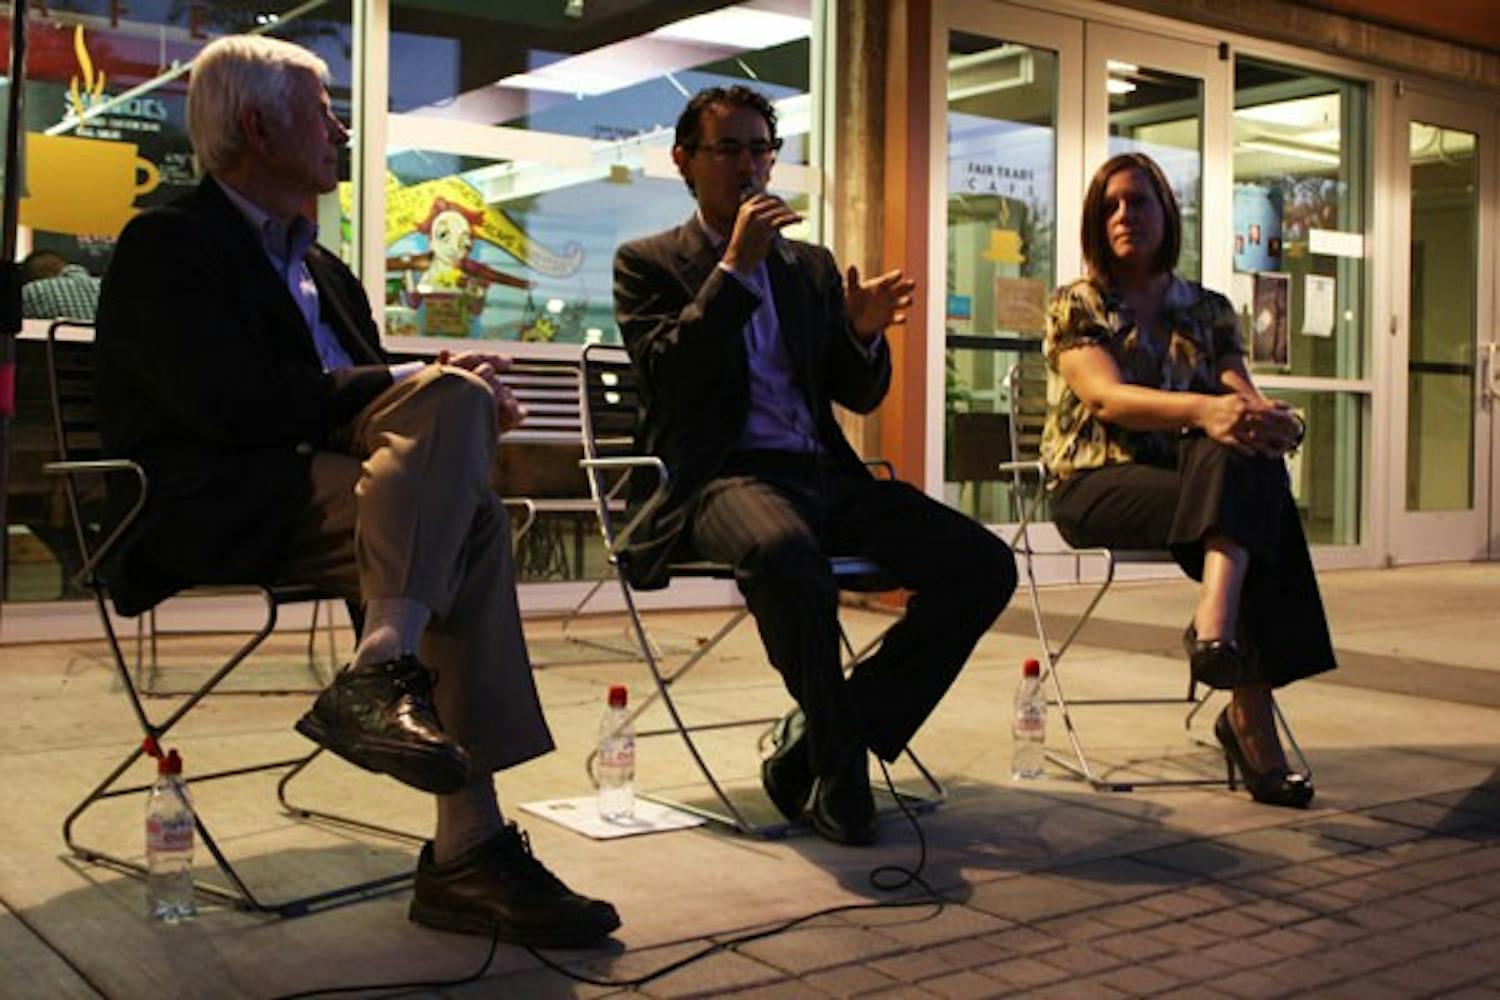 Former ASU president Lattie F. Coor was the keynote speaker at the debate Monday evening between District 24 candidates Auggie Bartning and Katie Hobbs outside of Fair Trade Cafe in downtown Phoenix. (Photo by Jessie Wardarski)